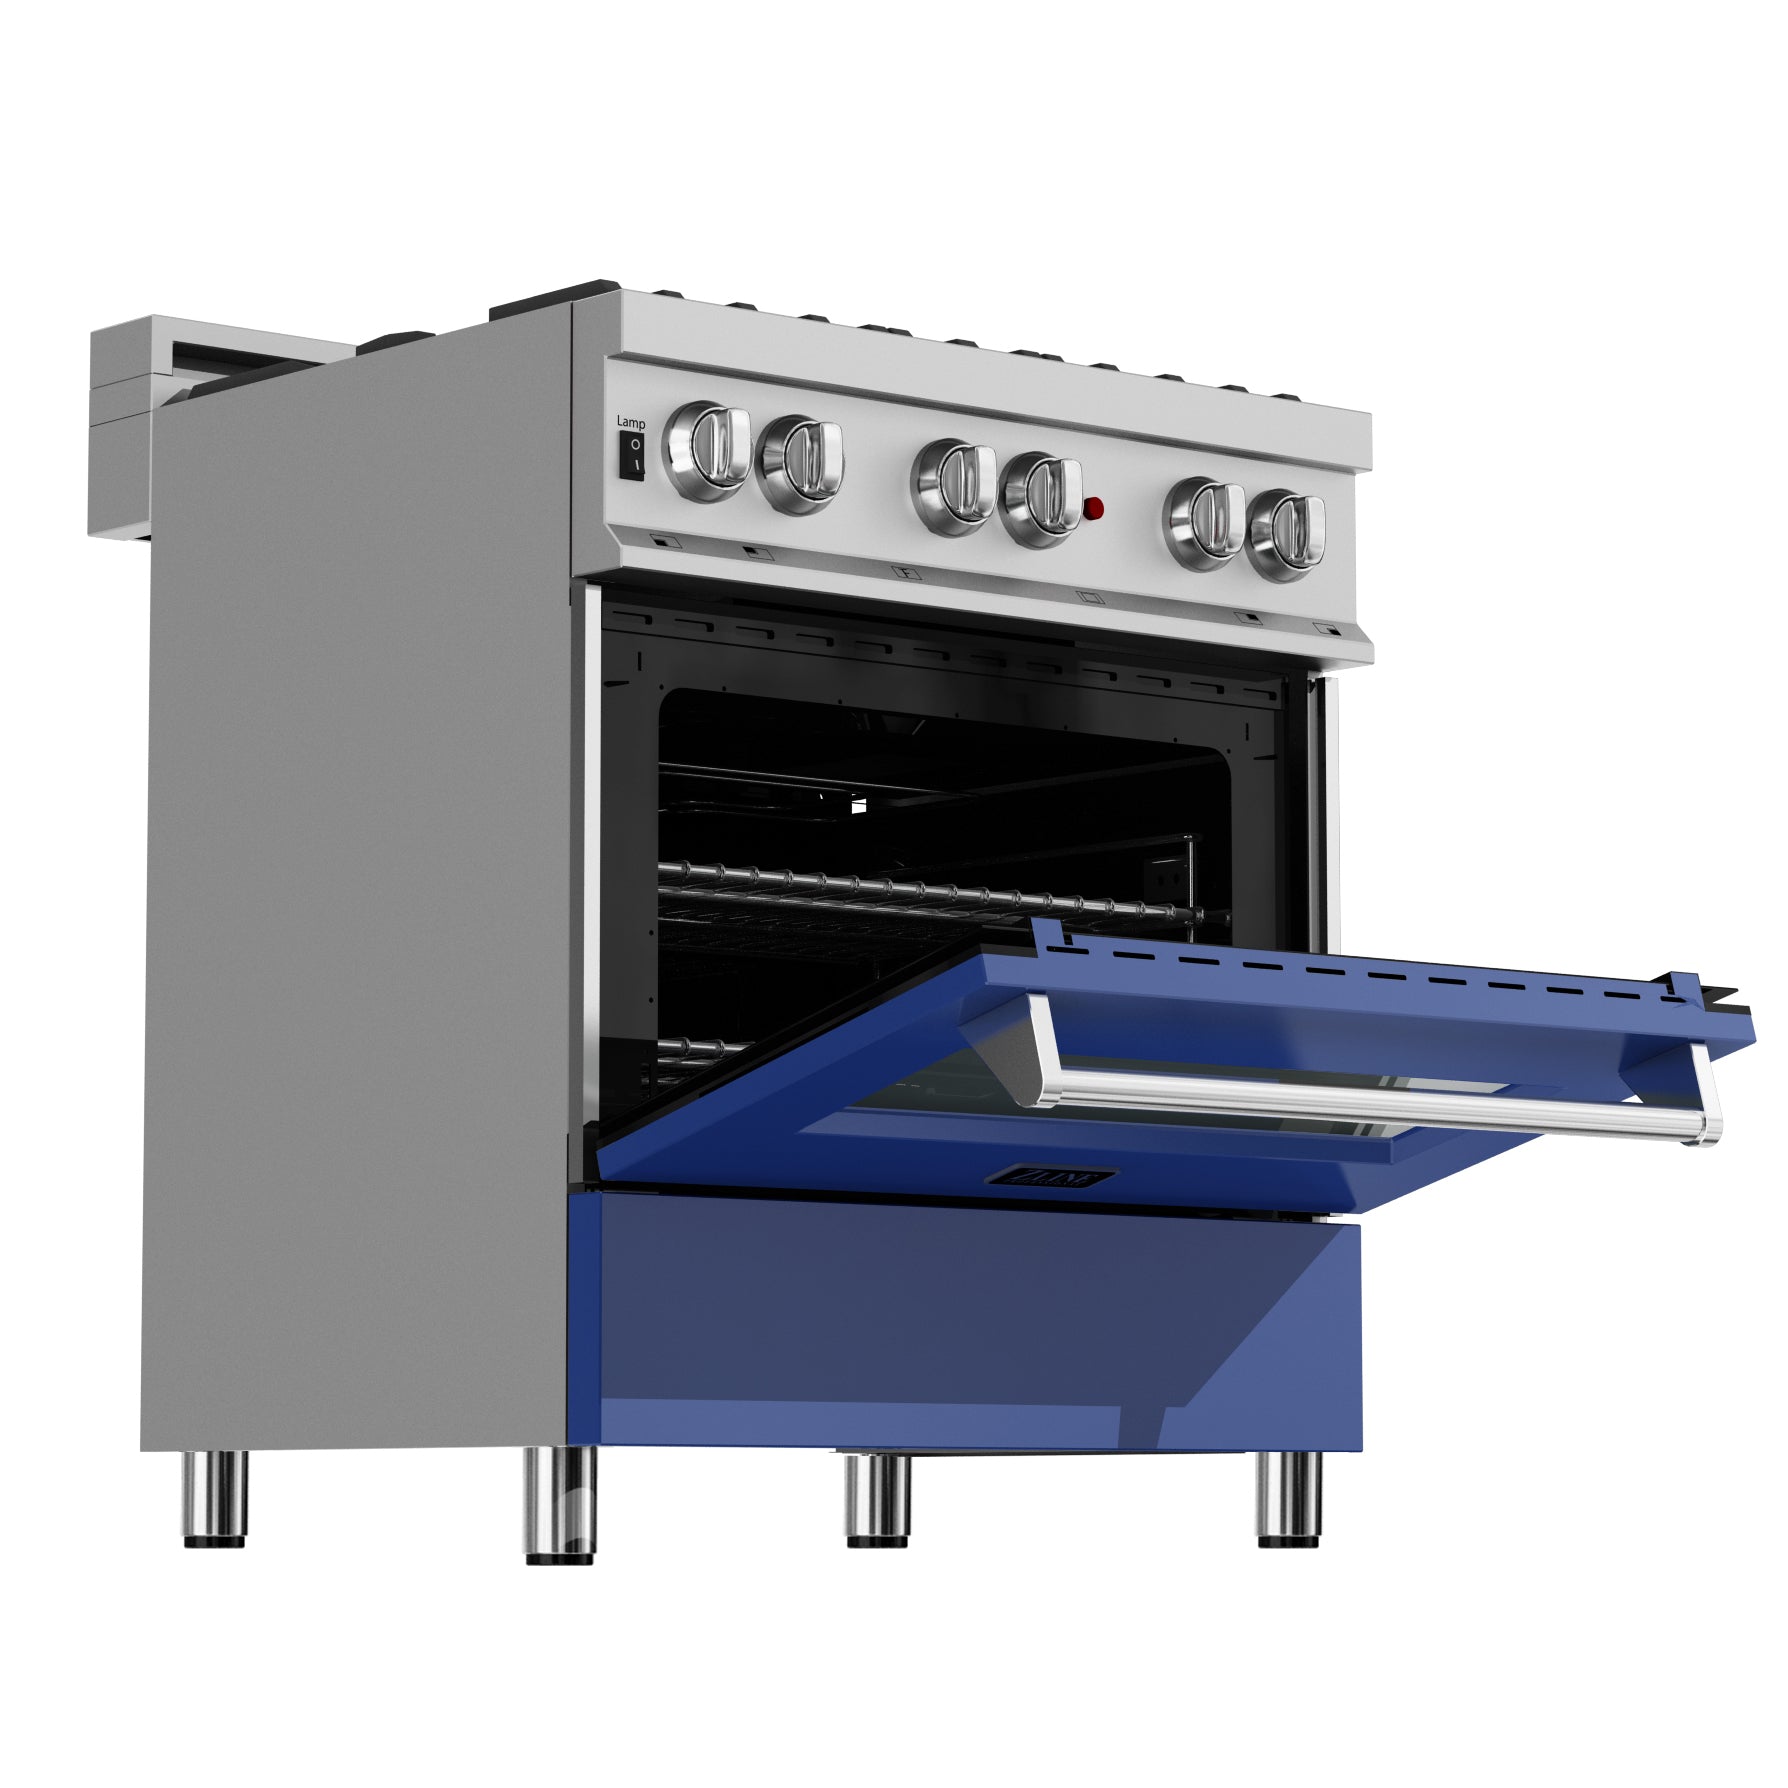 ZLINE 30" 4.0 cu. ft. Dual Fuel Range with Gas Stove and Electric Oven in Fingerprint Resistant Stainless Steel and Blue Matte Door (RAS-BM-30)